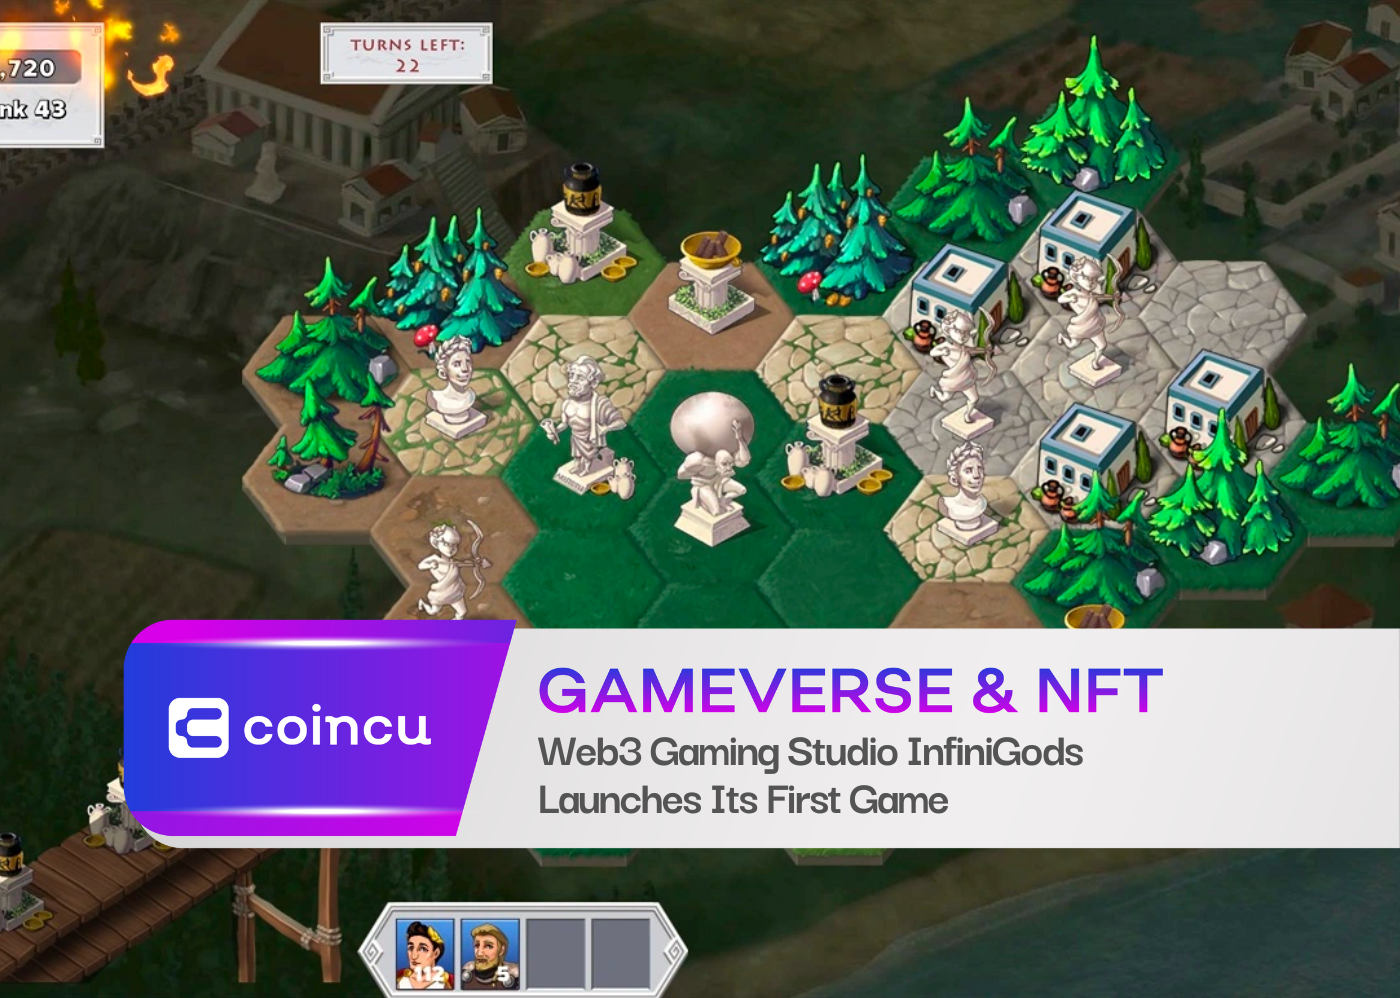 Web3 Gaming Studio InfiniGods Launches Its First Game